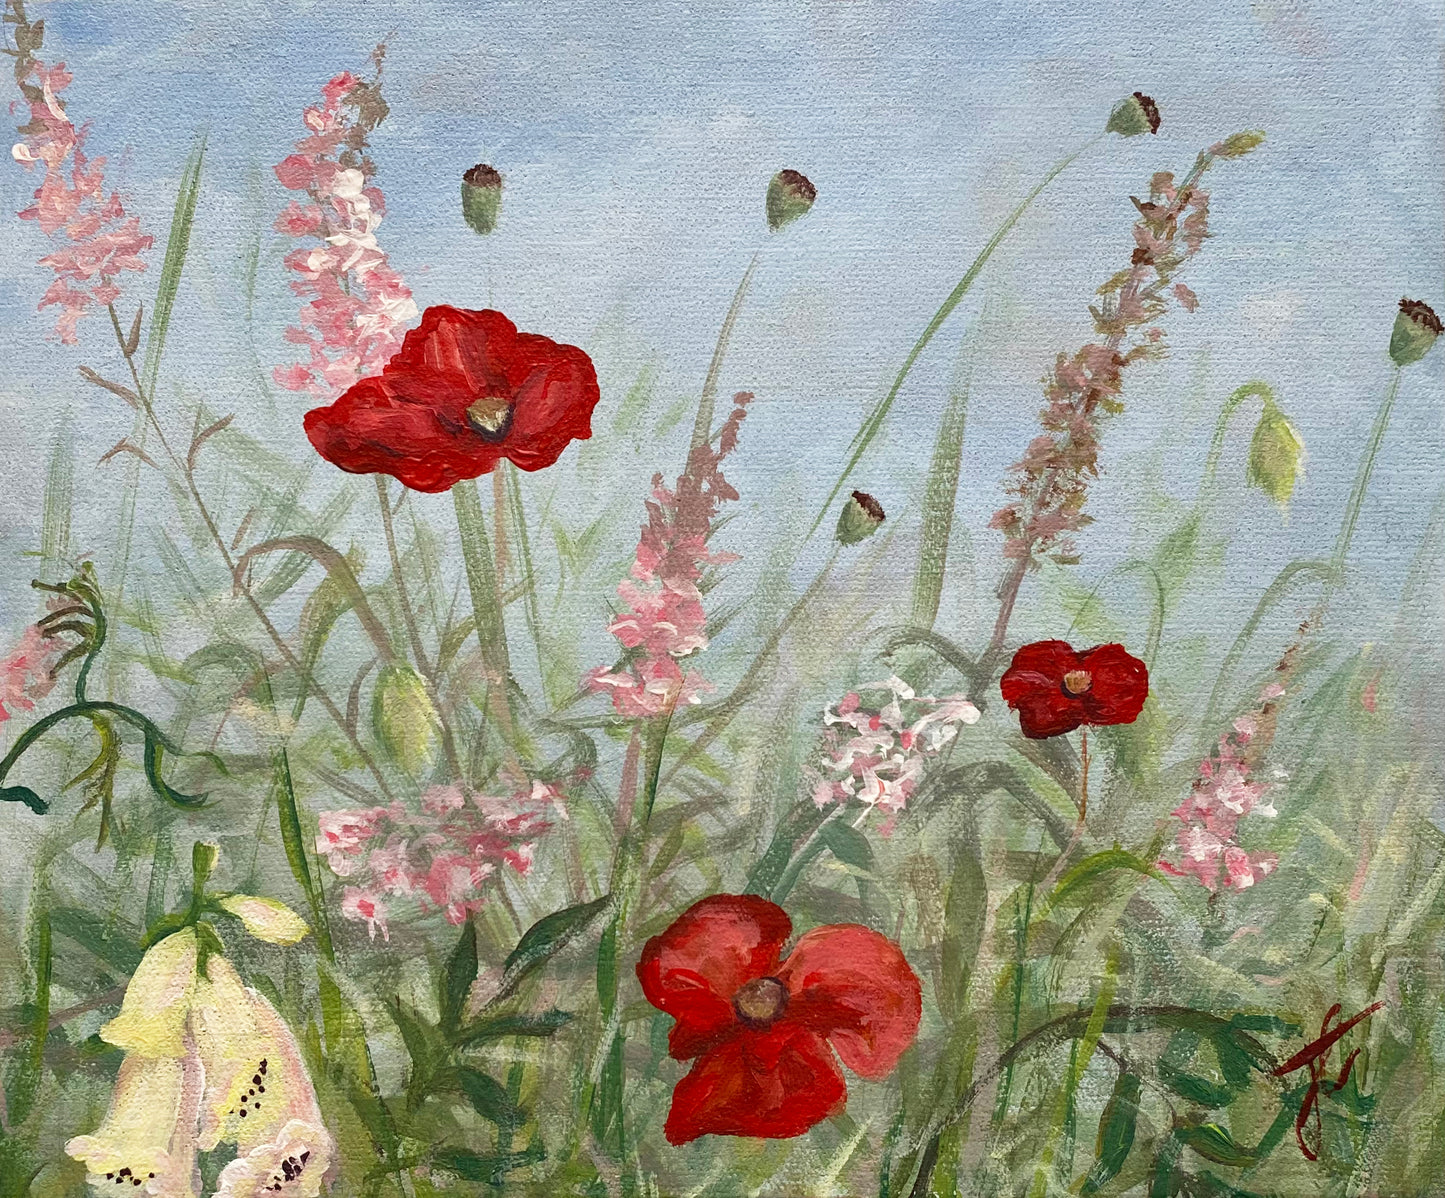 Flower painting of red poppies and other flowers in garden